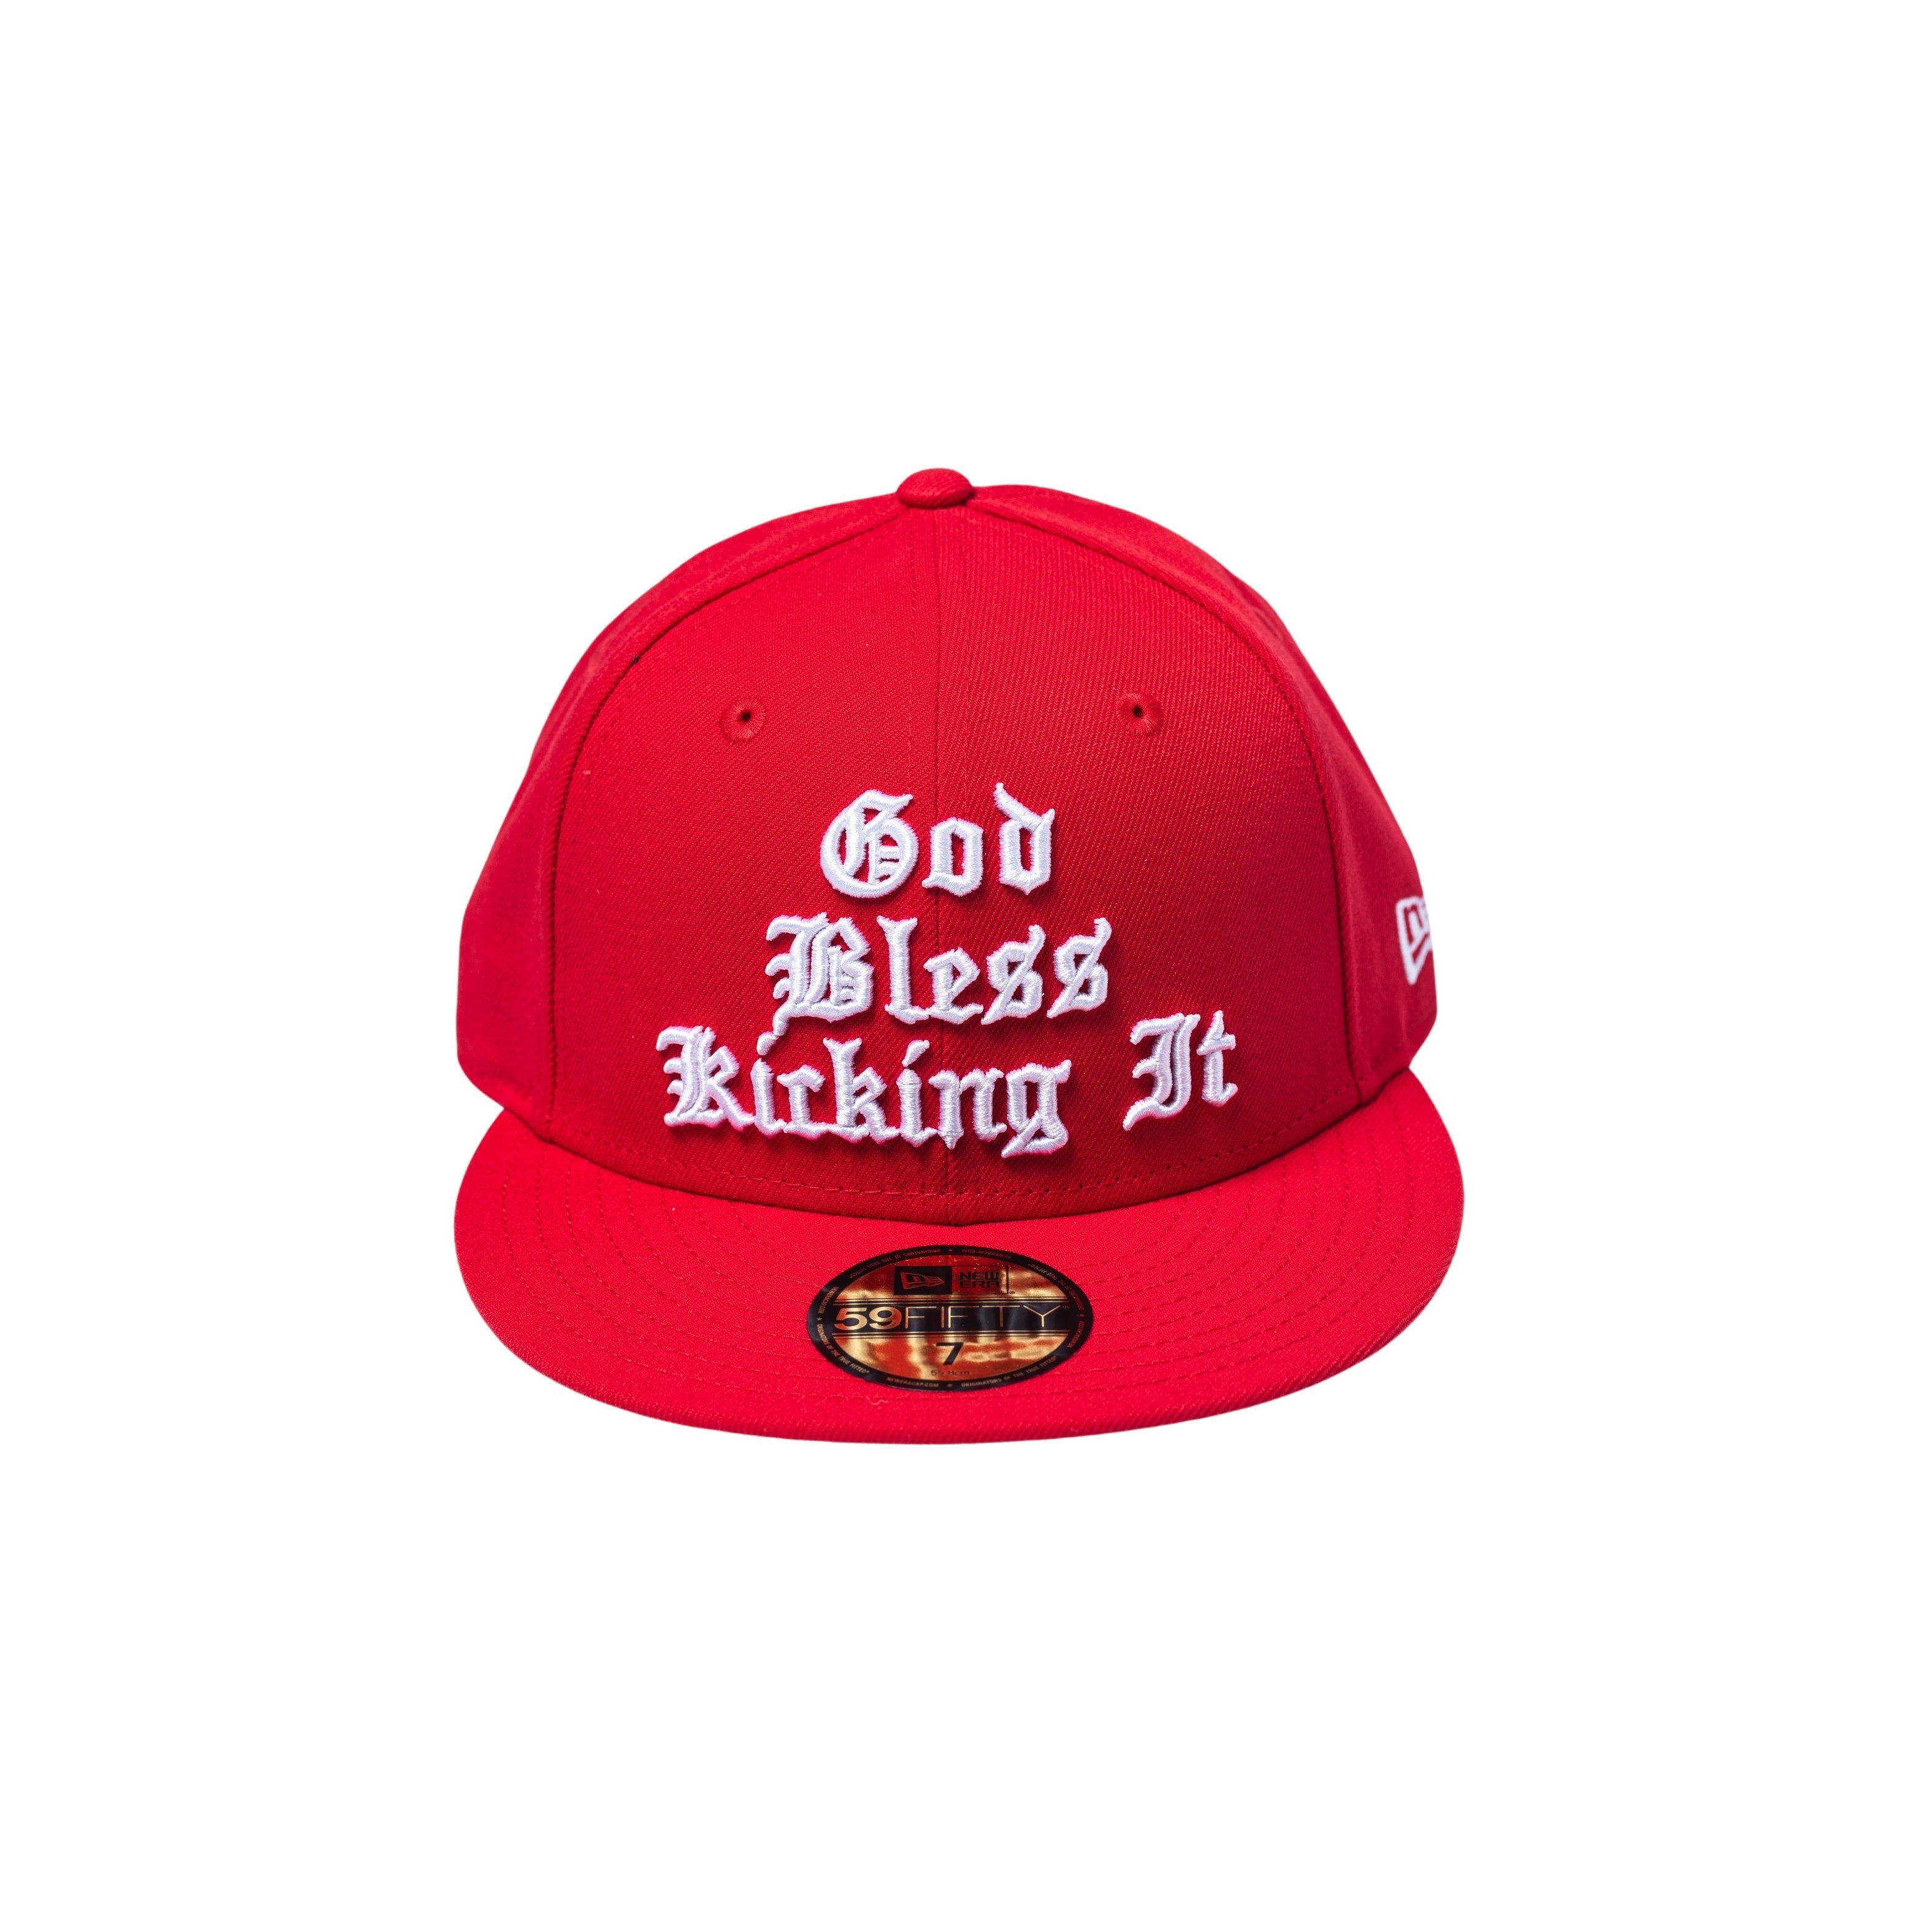 God Bless Kicking It Fitted Cap